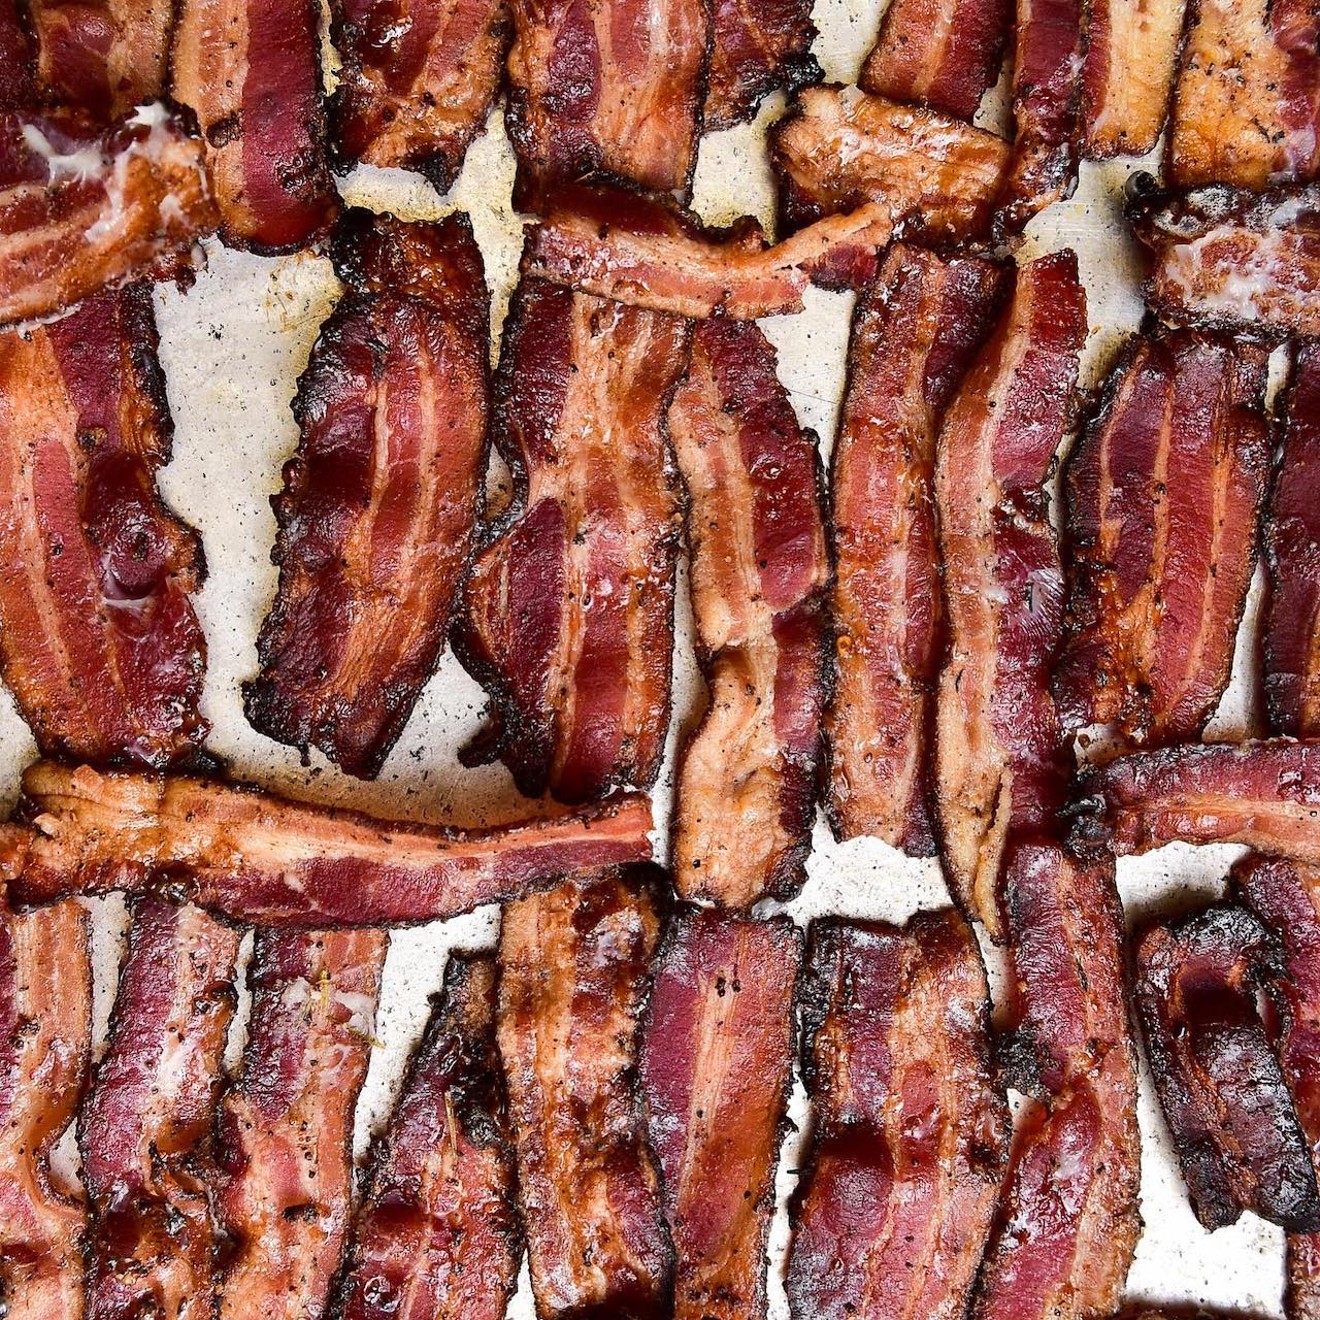 Cochon555 is all about the bacon.